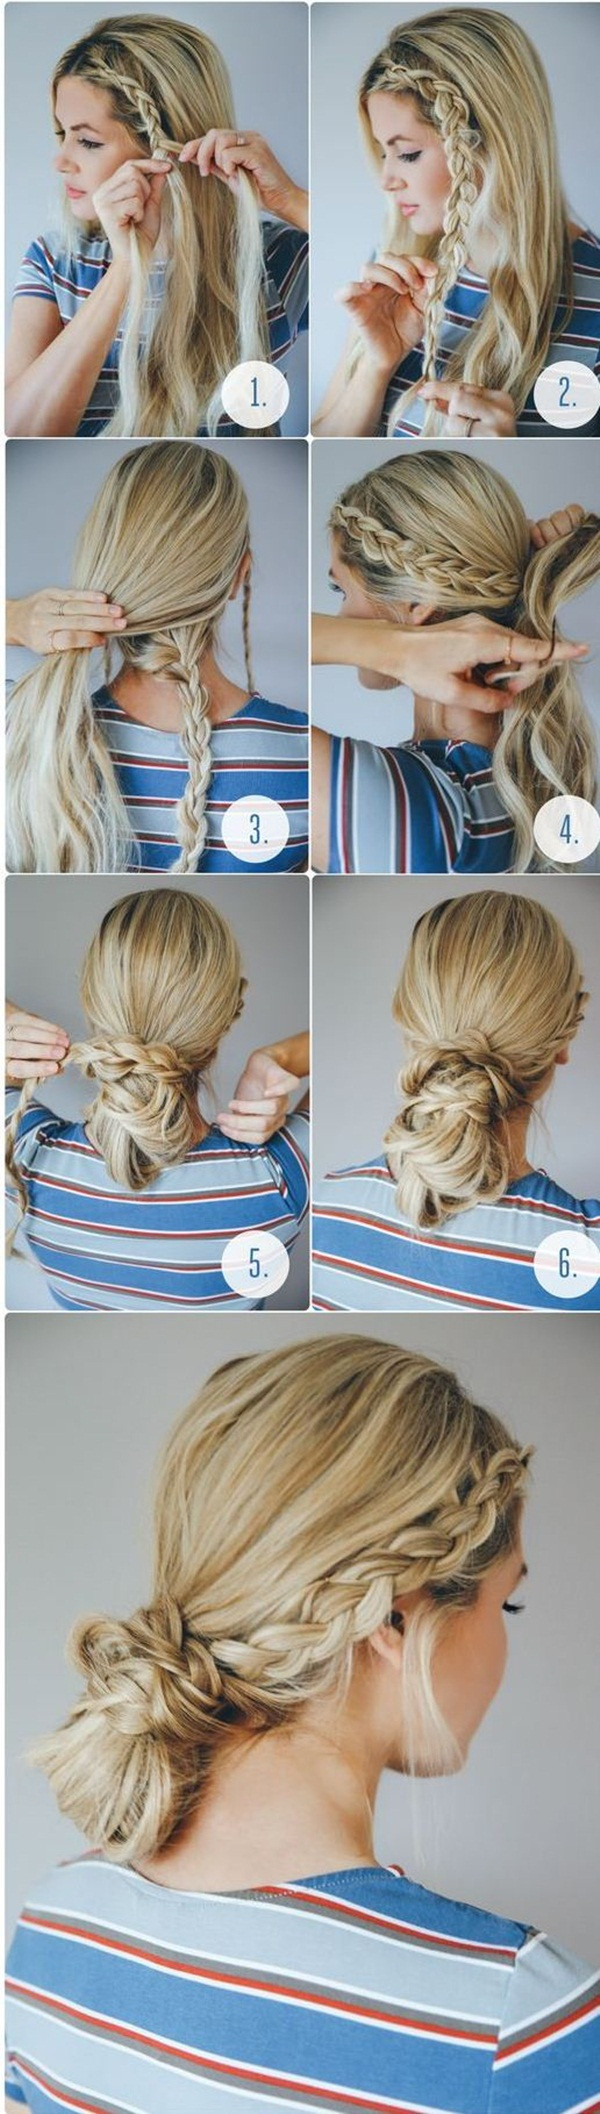 Fast And Easy Hairstyles For School
 40 Easy Hairstyles for Schools to Try in 2016